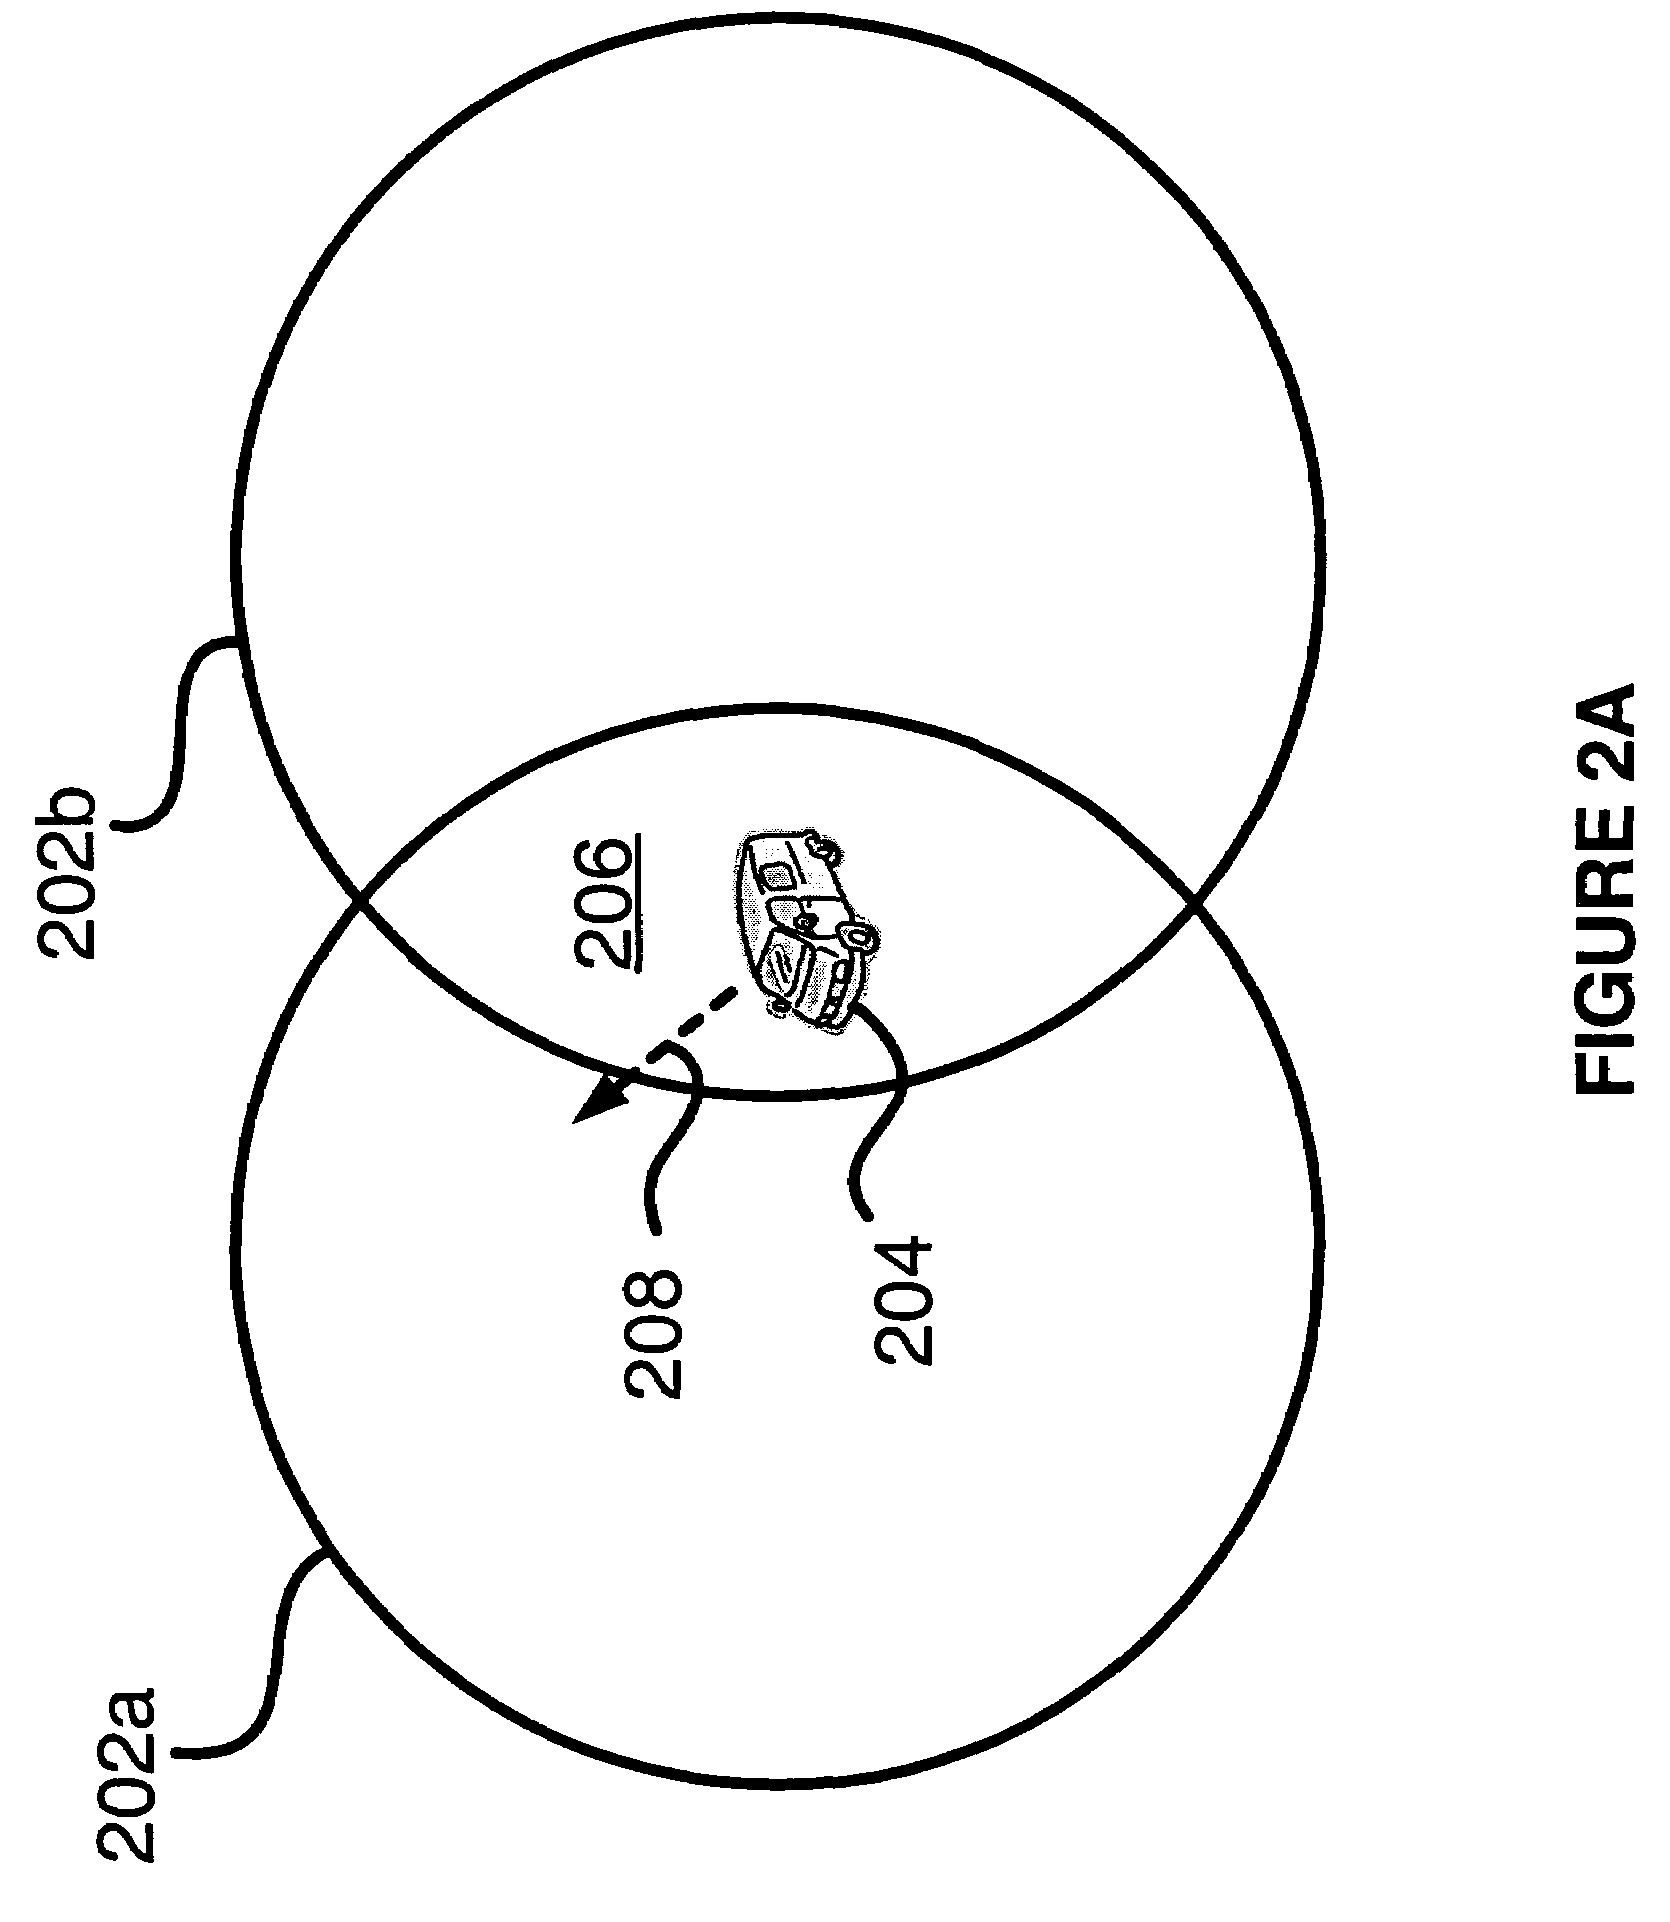 System of and method for using position, velocity, or direction of motion estimates to support handover decisions